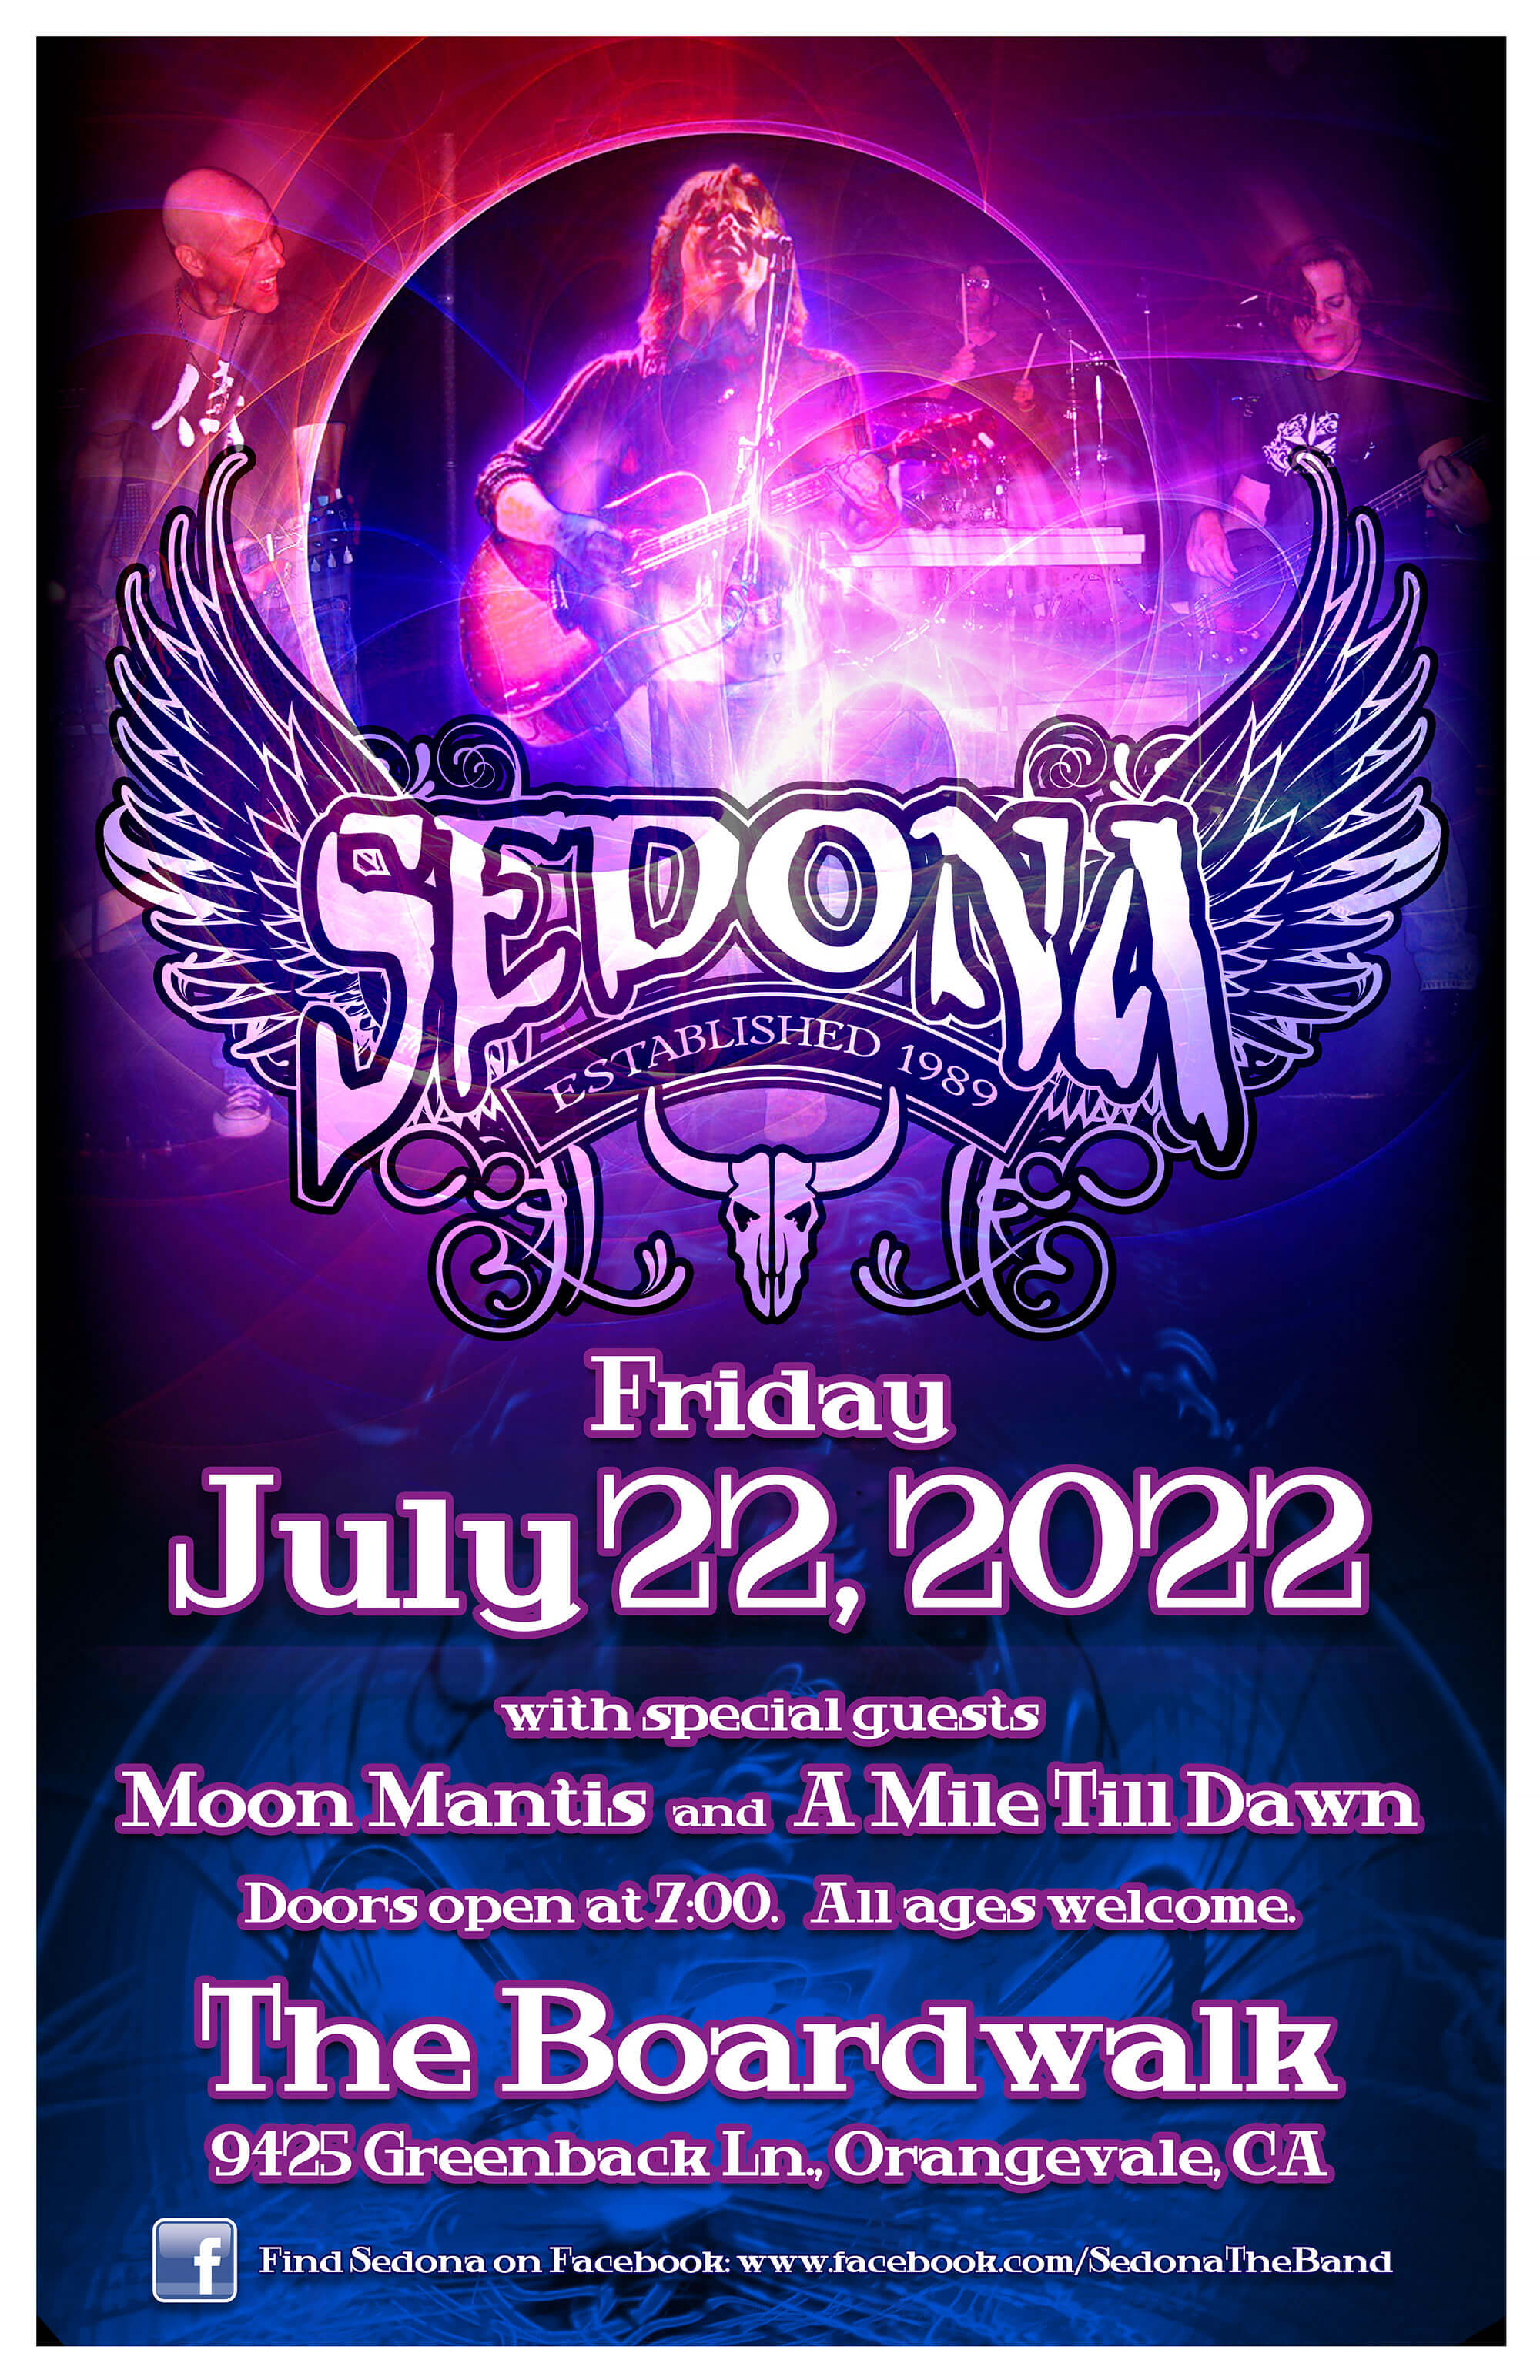 Promotional poster for the band Sedona